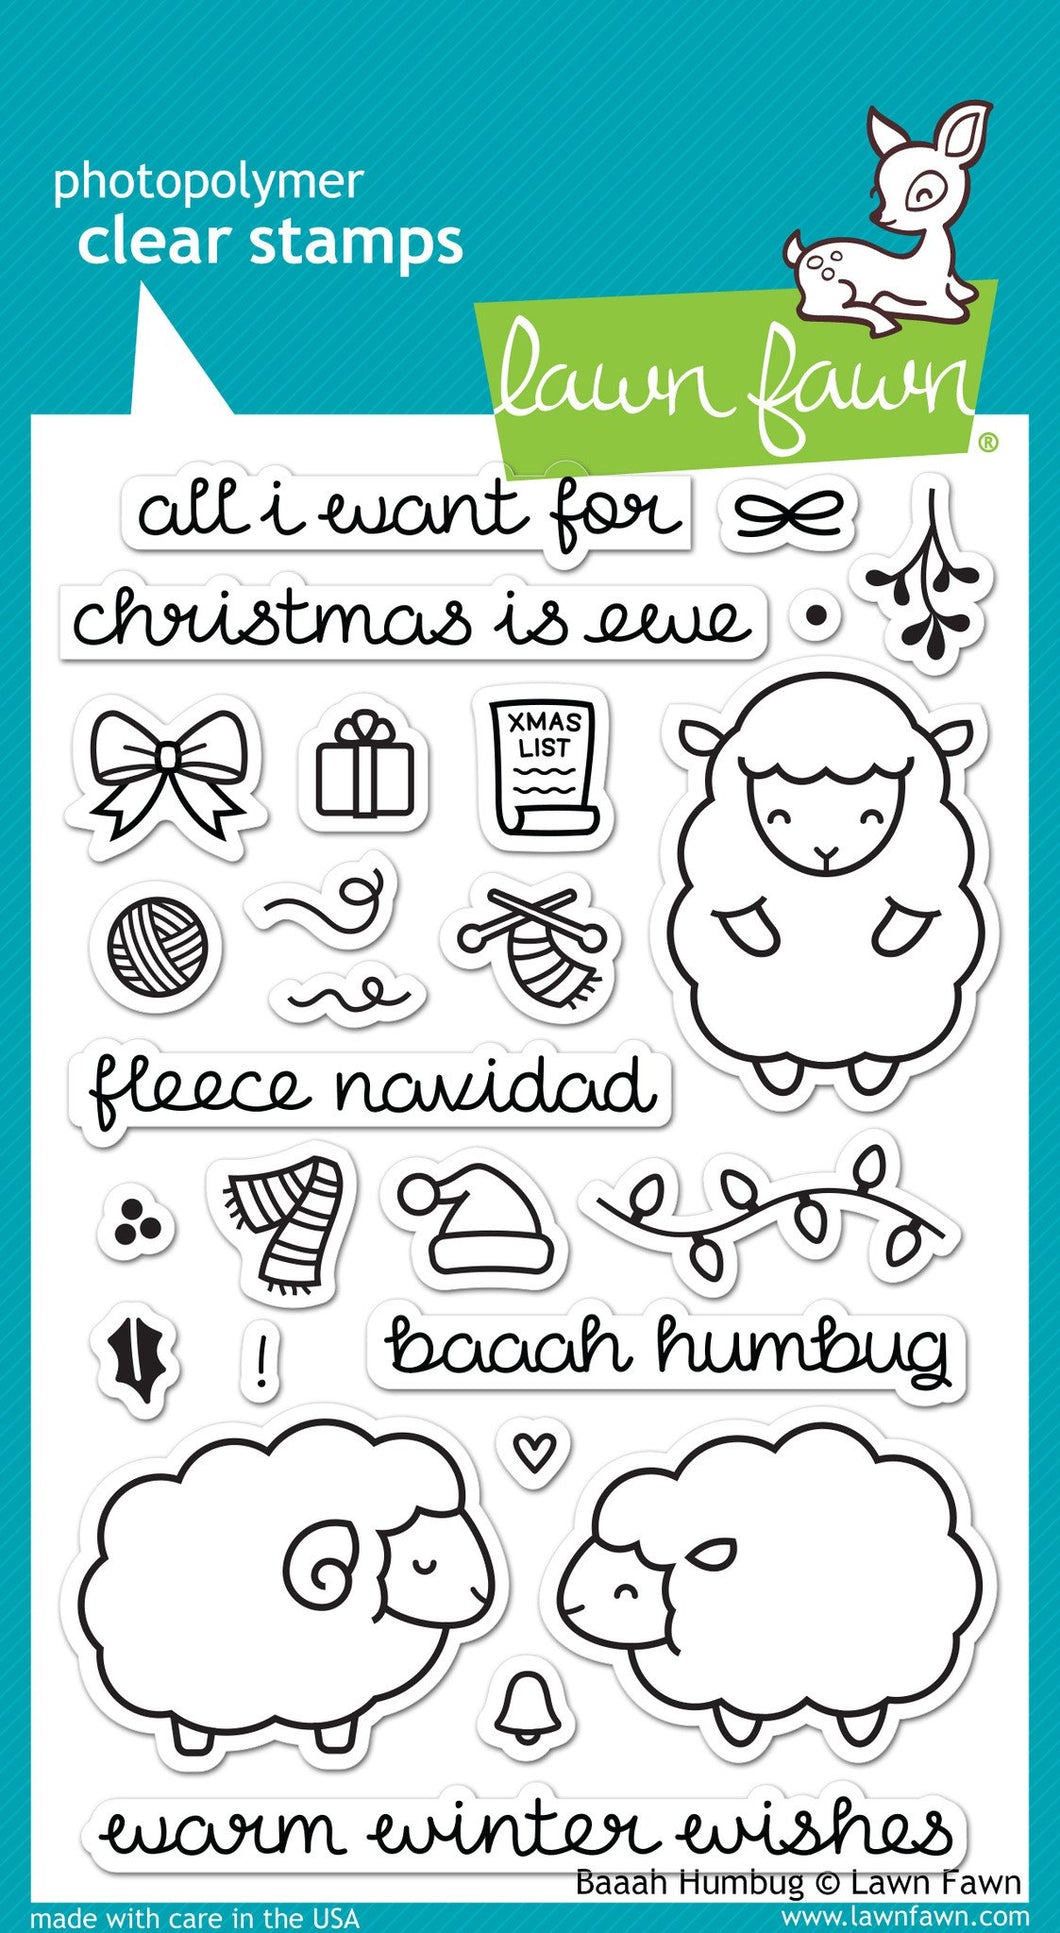 Lawn Fawn-Clear Stamps-Baaah Humbug - Design Creative Bling